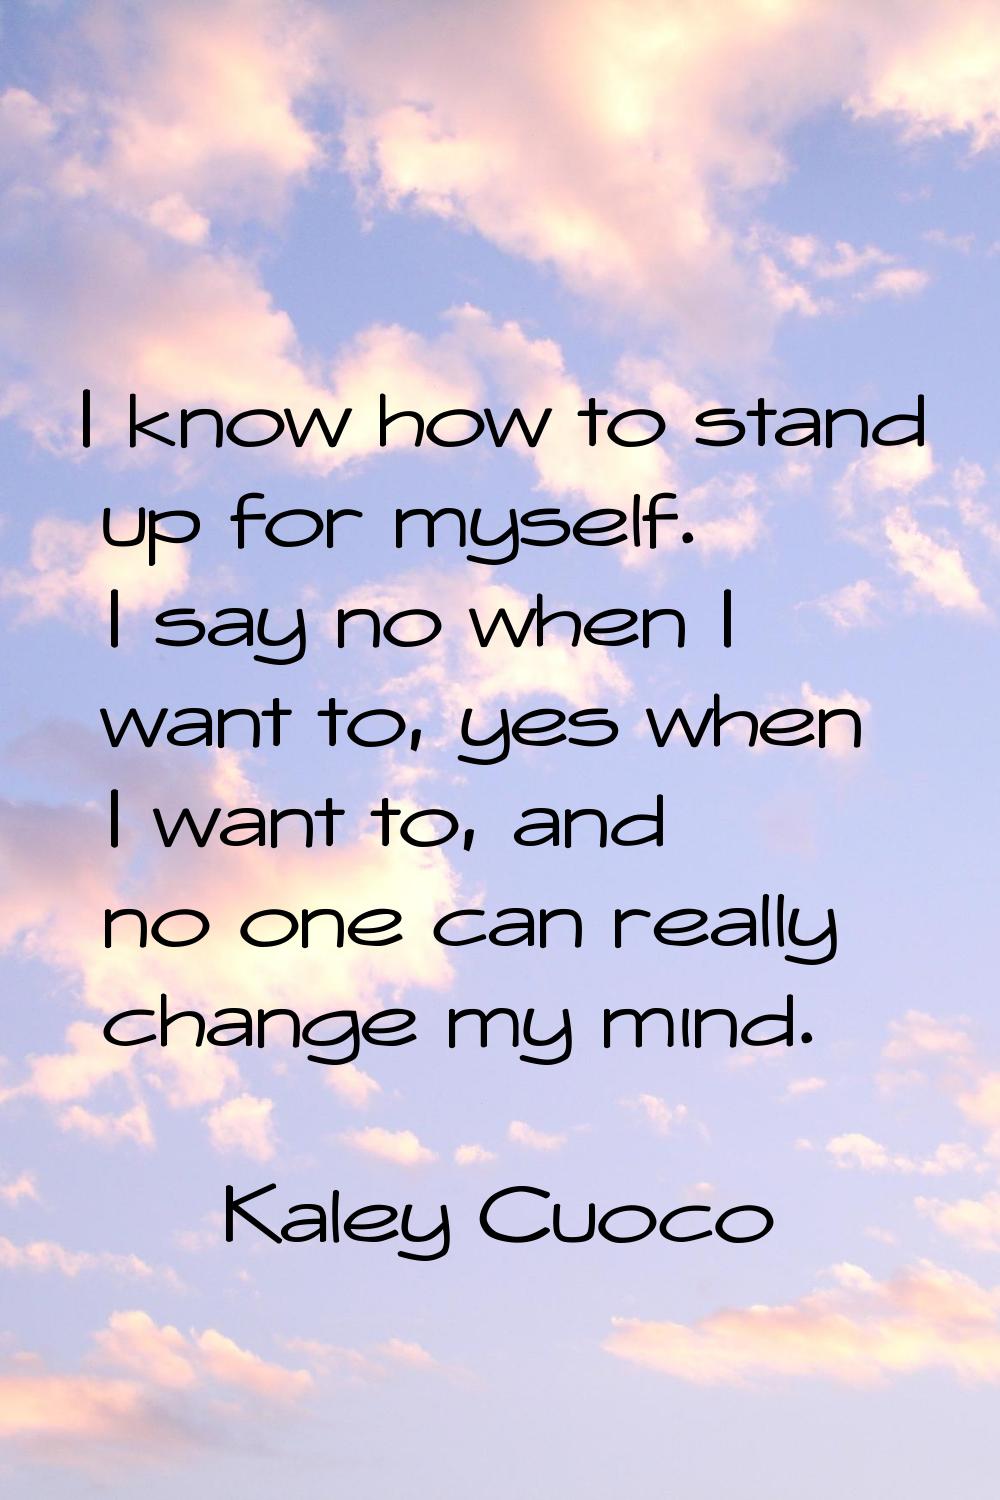 I know how to stand up for myself. I say no when I want to, yes when I want to, and no one can real